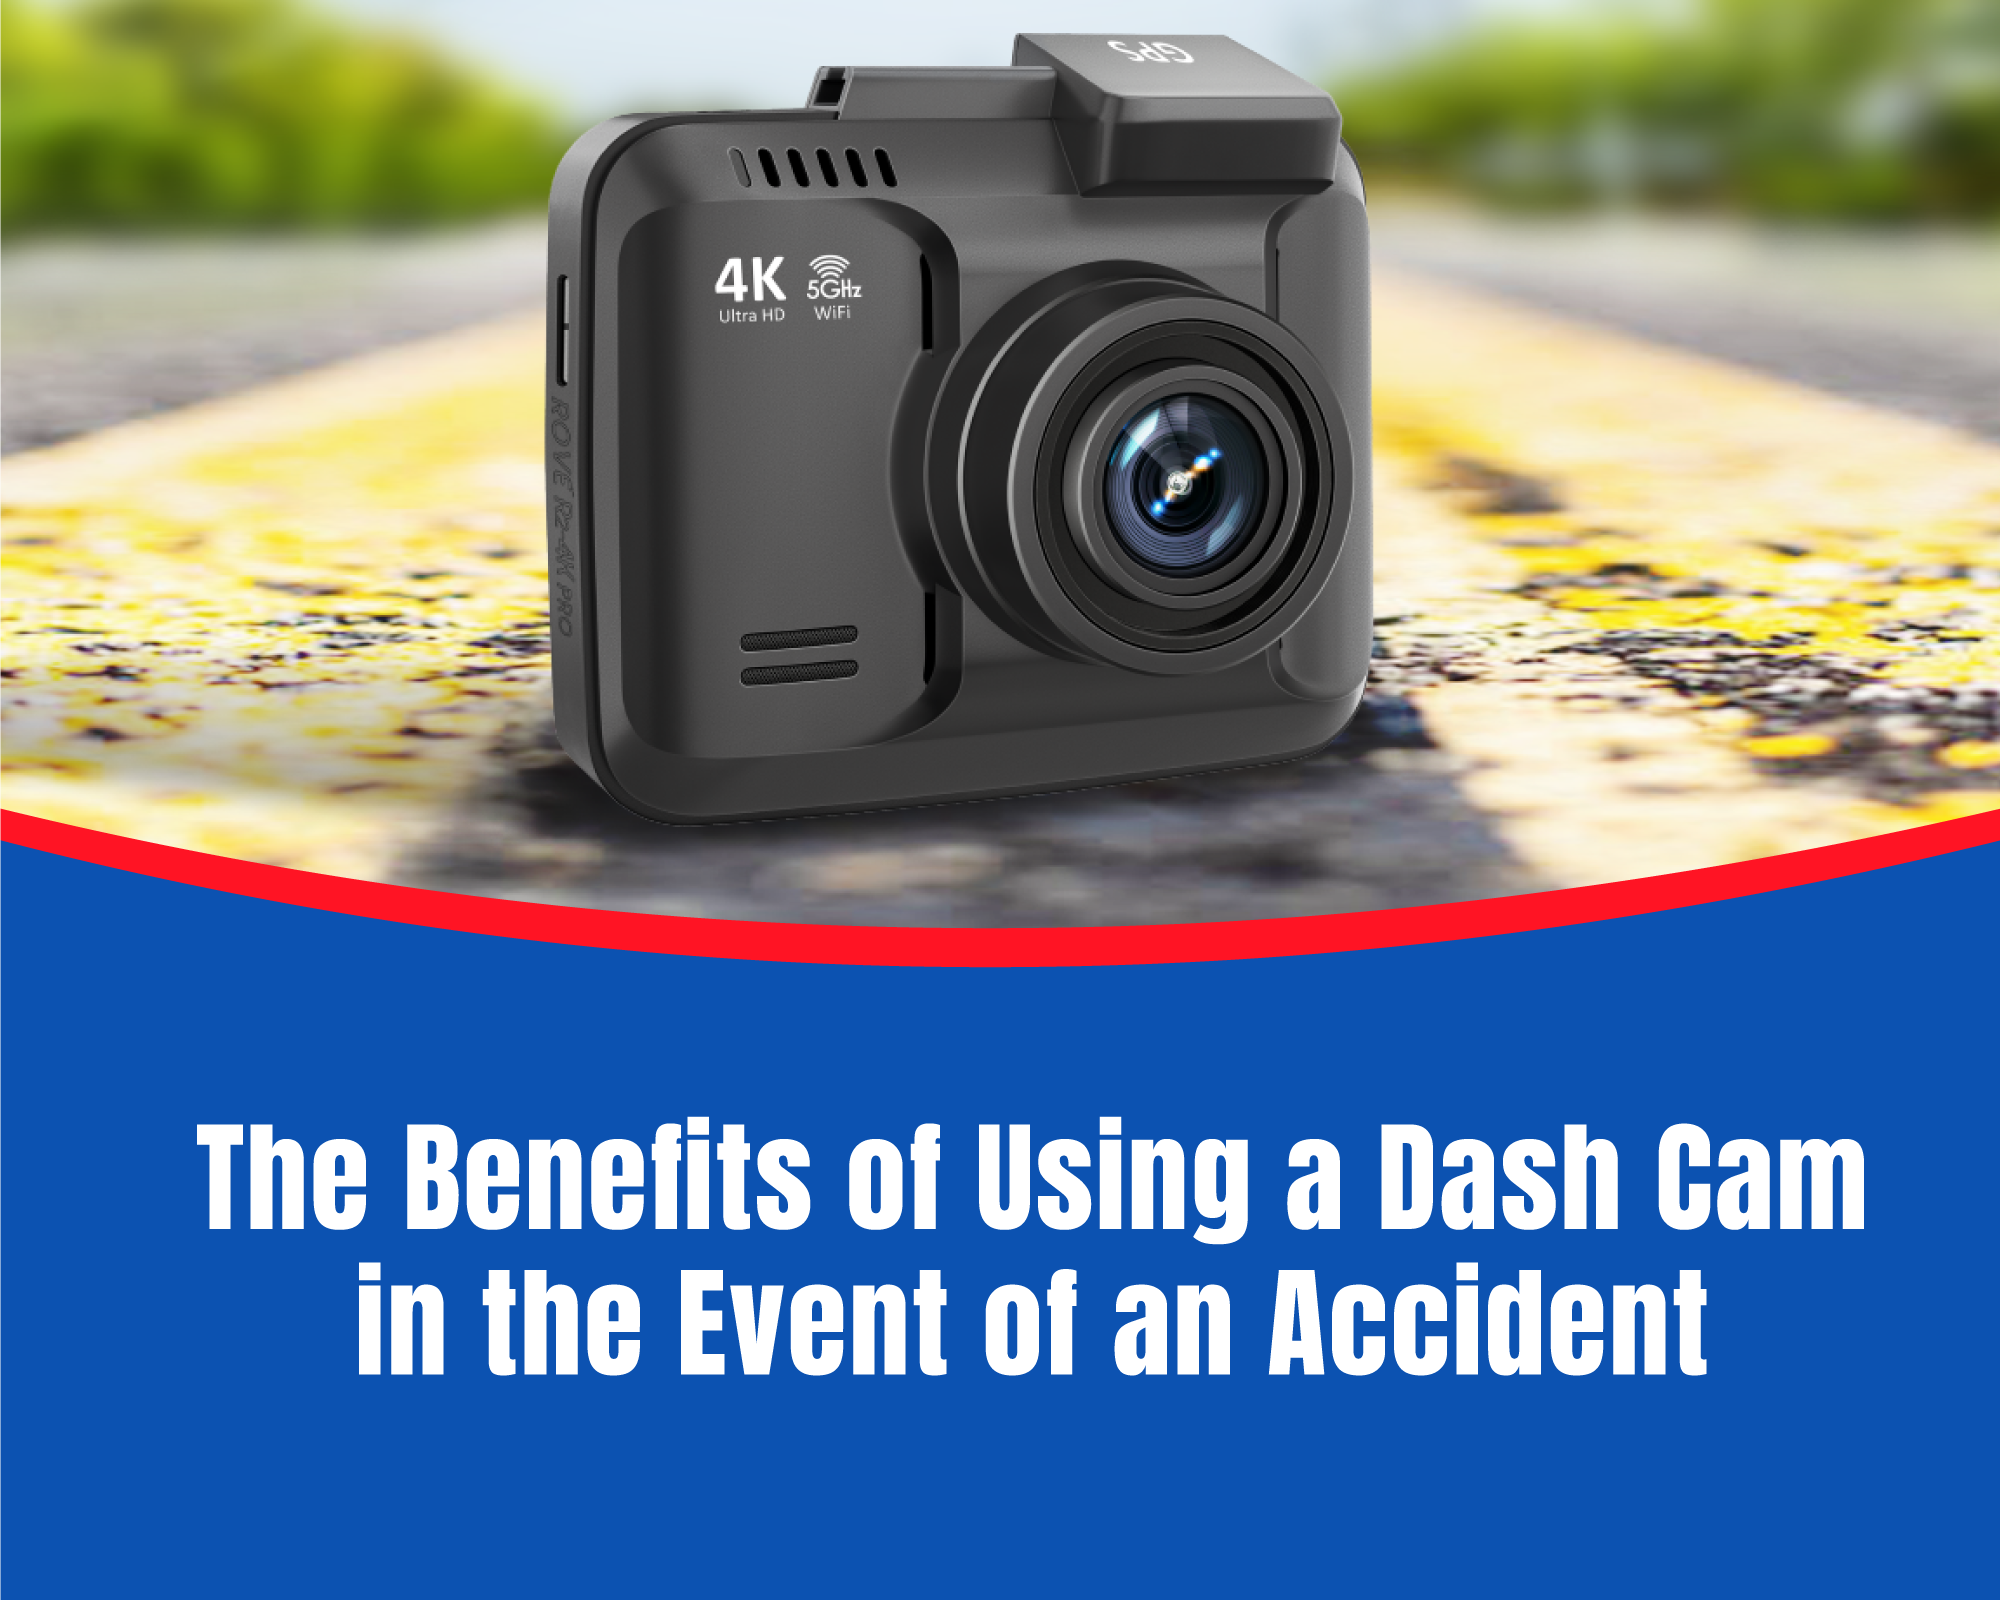 The Benefits of Using a Dash Cam in the Event of an Accident